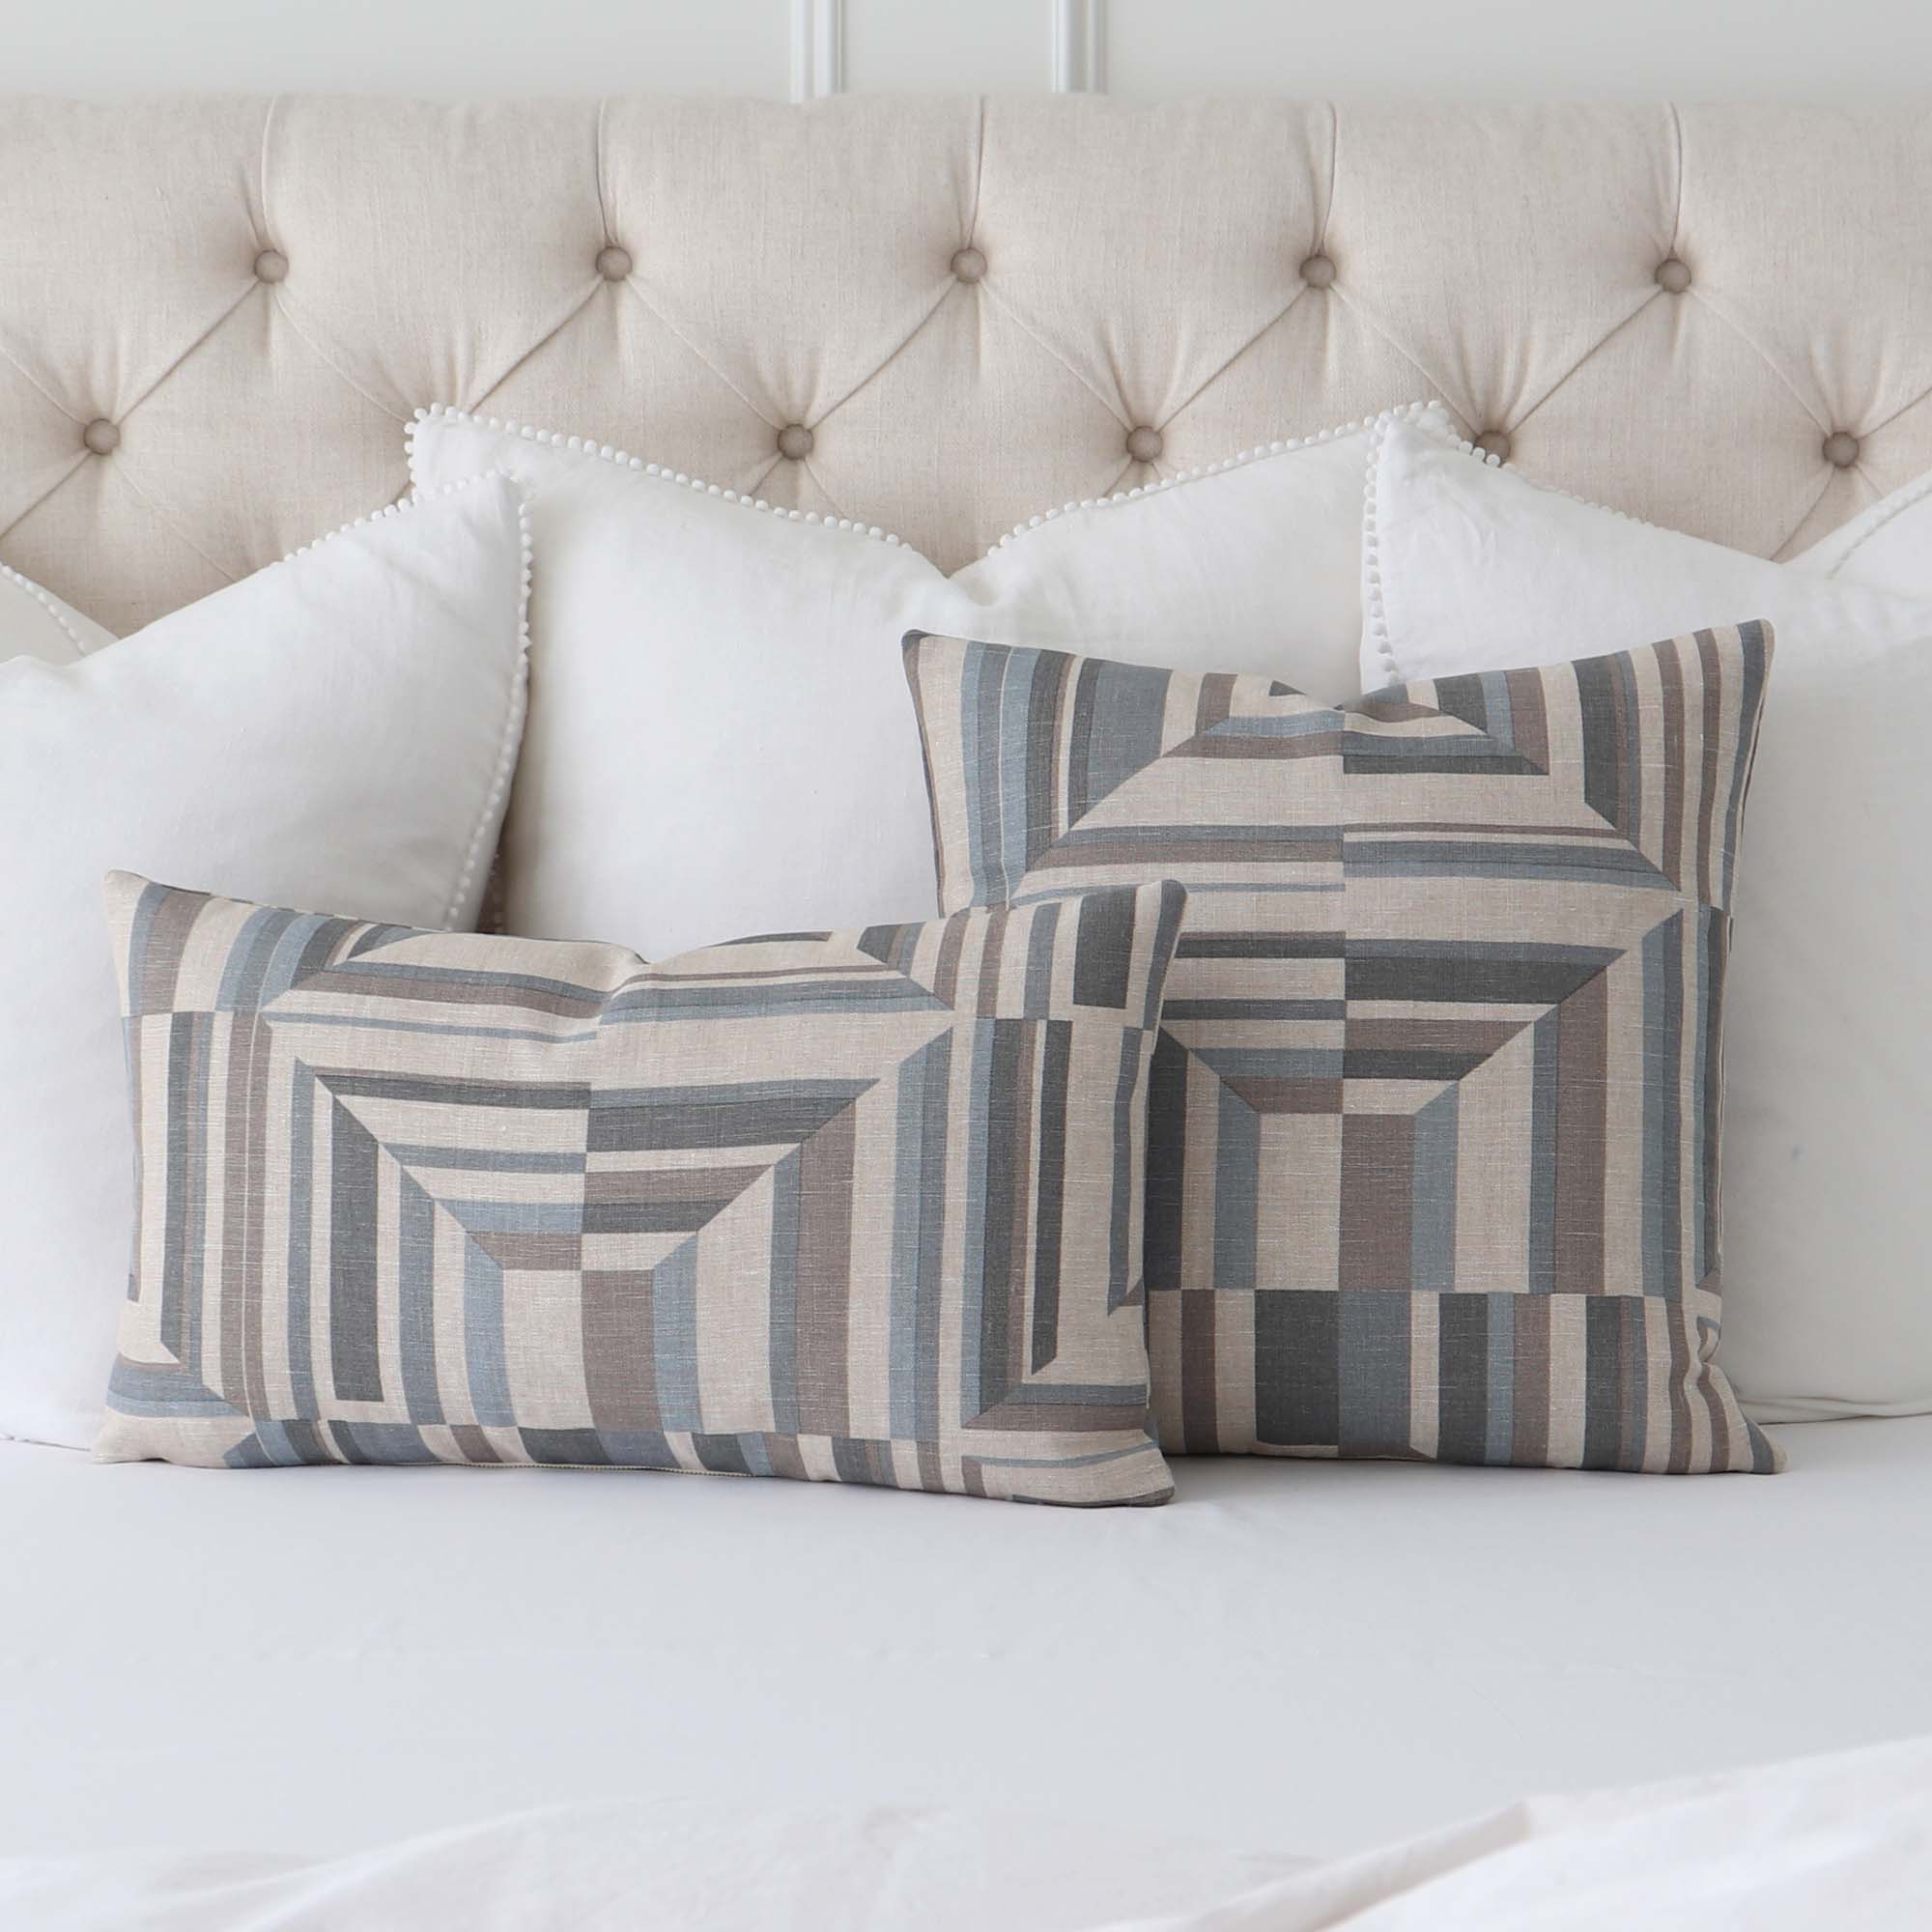 https://www.chloeandolive.com/cdn/shop/products/Thibaut-Cubism-Geometric-Spa-Blue-Flax-Stripes-Linen-Designer-Luxury-Decorative-Throw-Pillow-Cover-on-Bed-with-Large-White-Throw-Pillows_2000x.jpg?v=1660430968